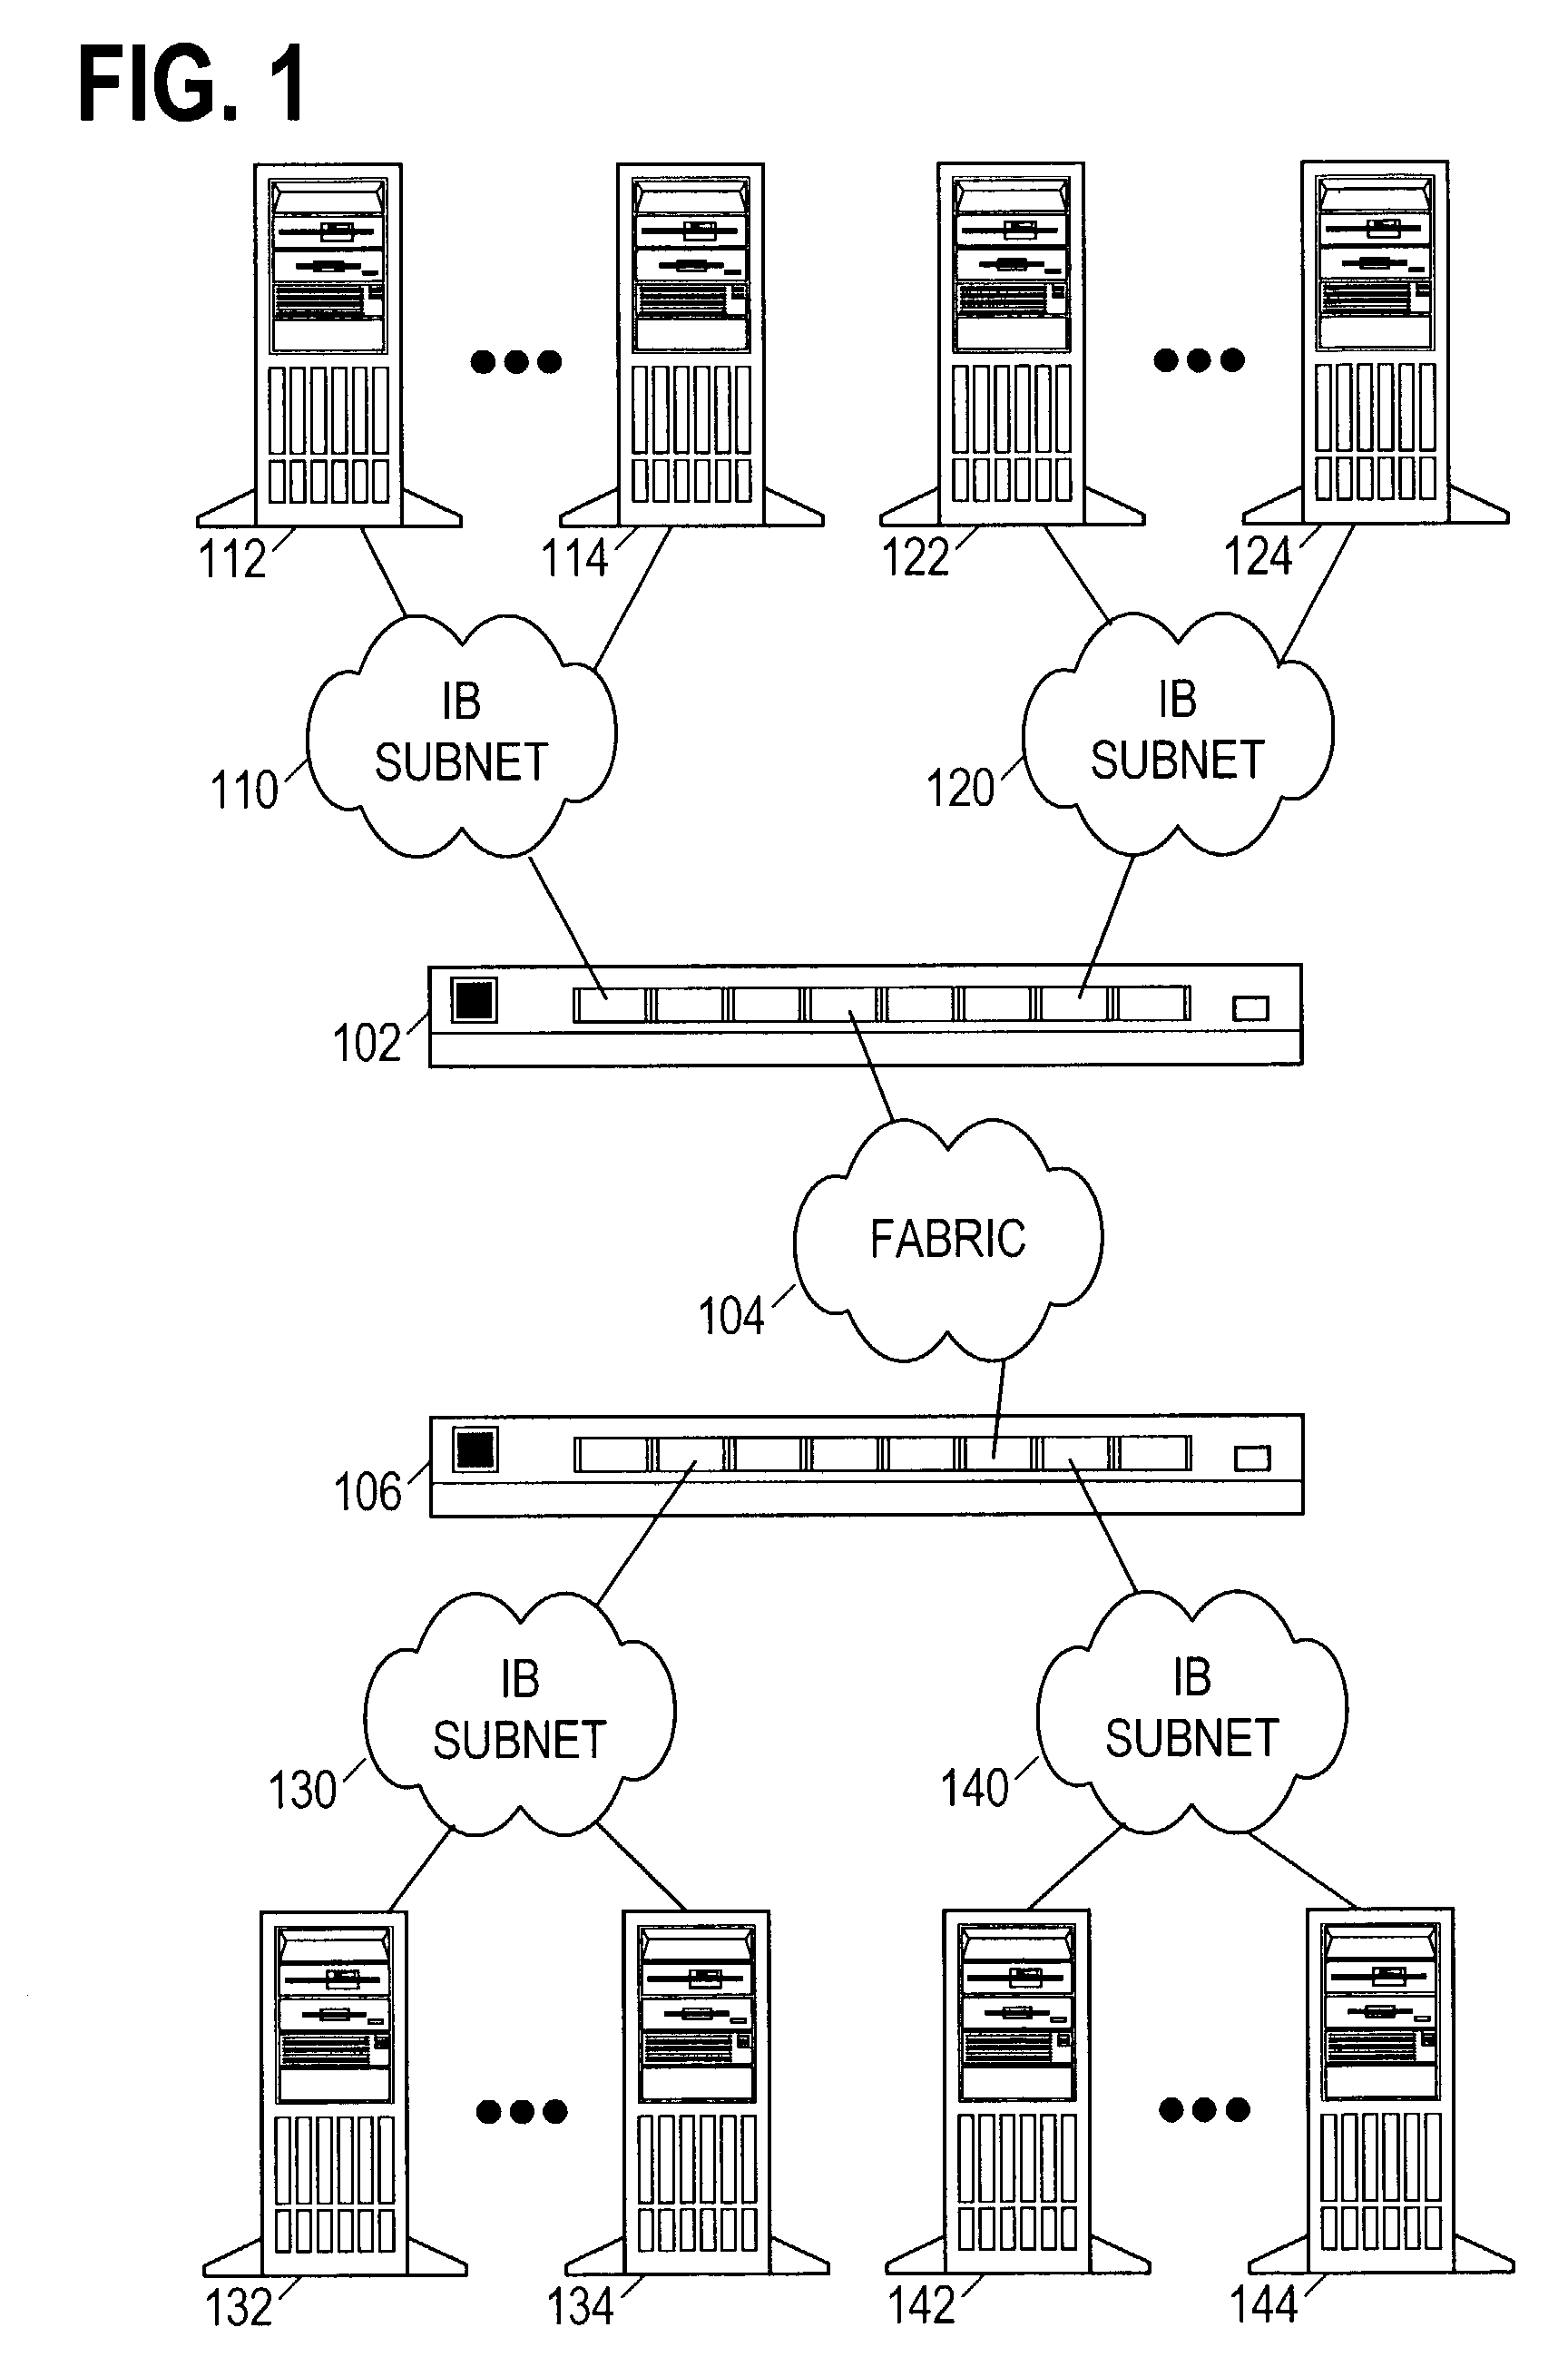 Infiniband router having an internal subnet architecture